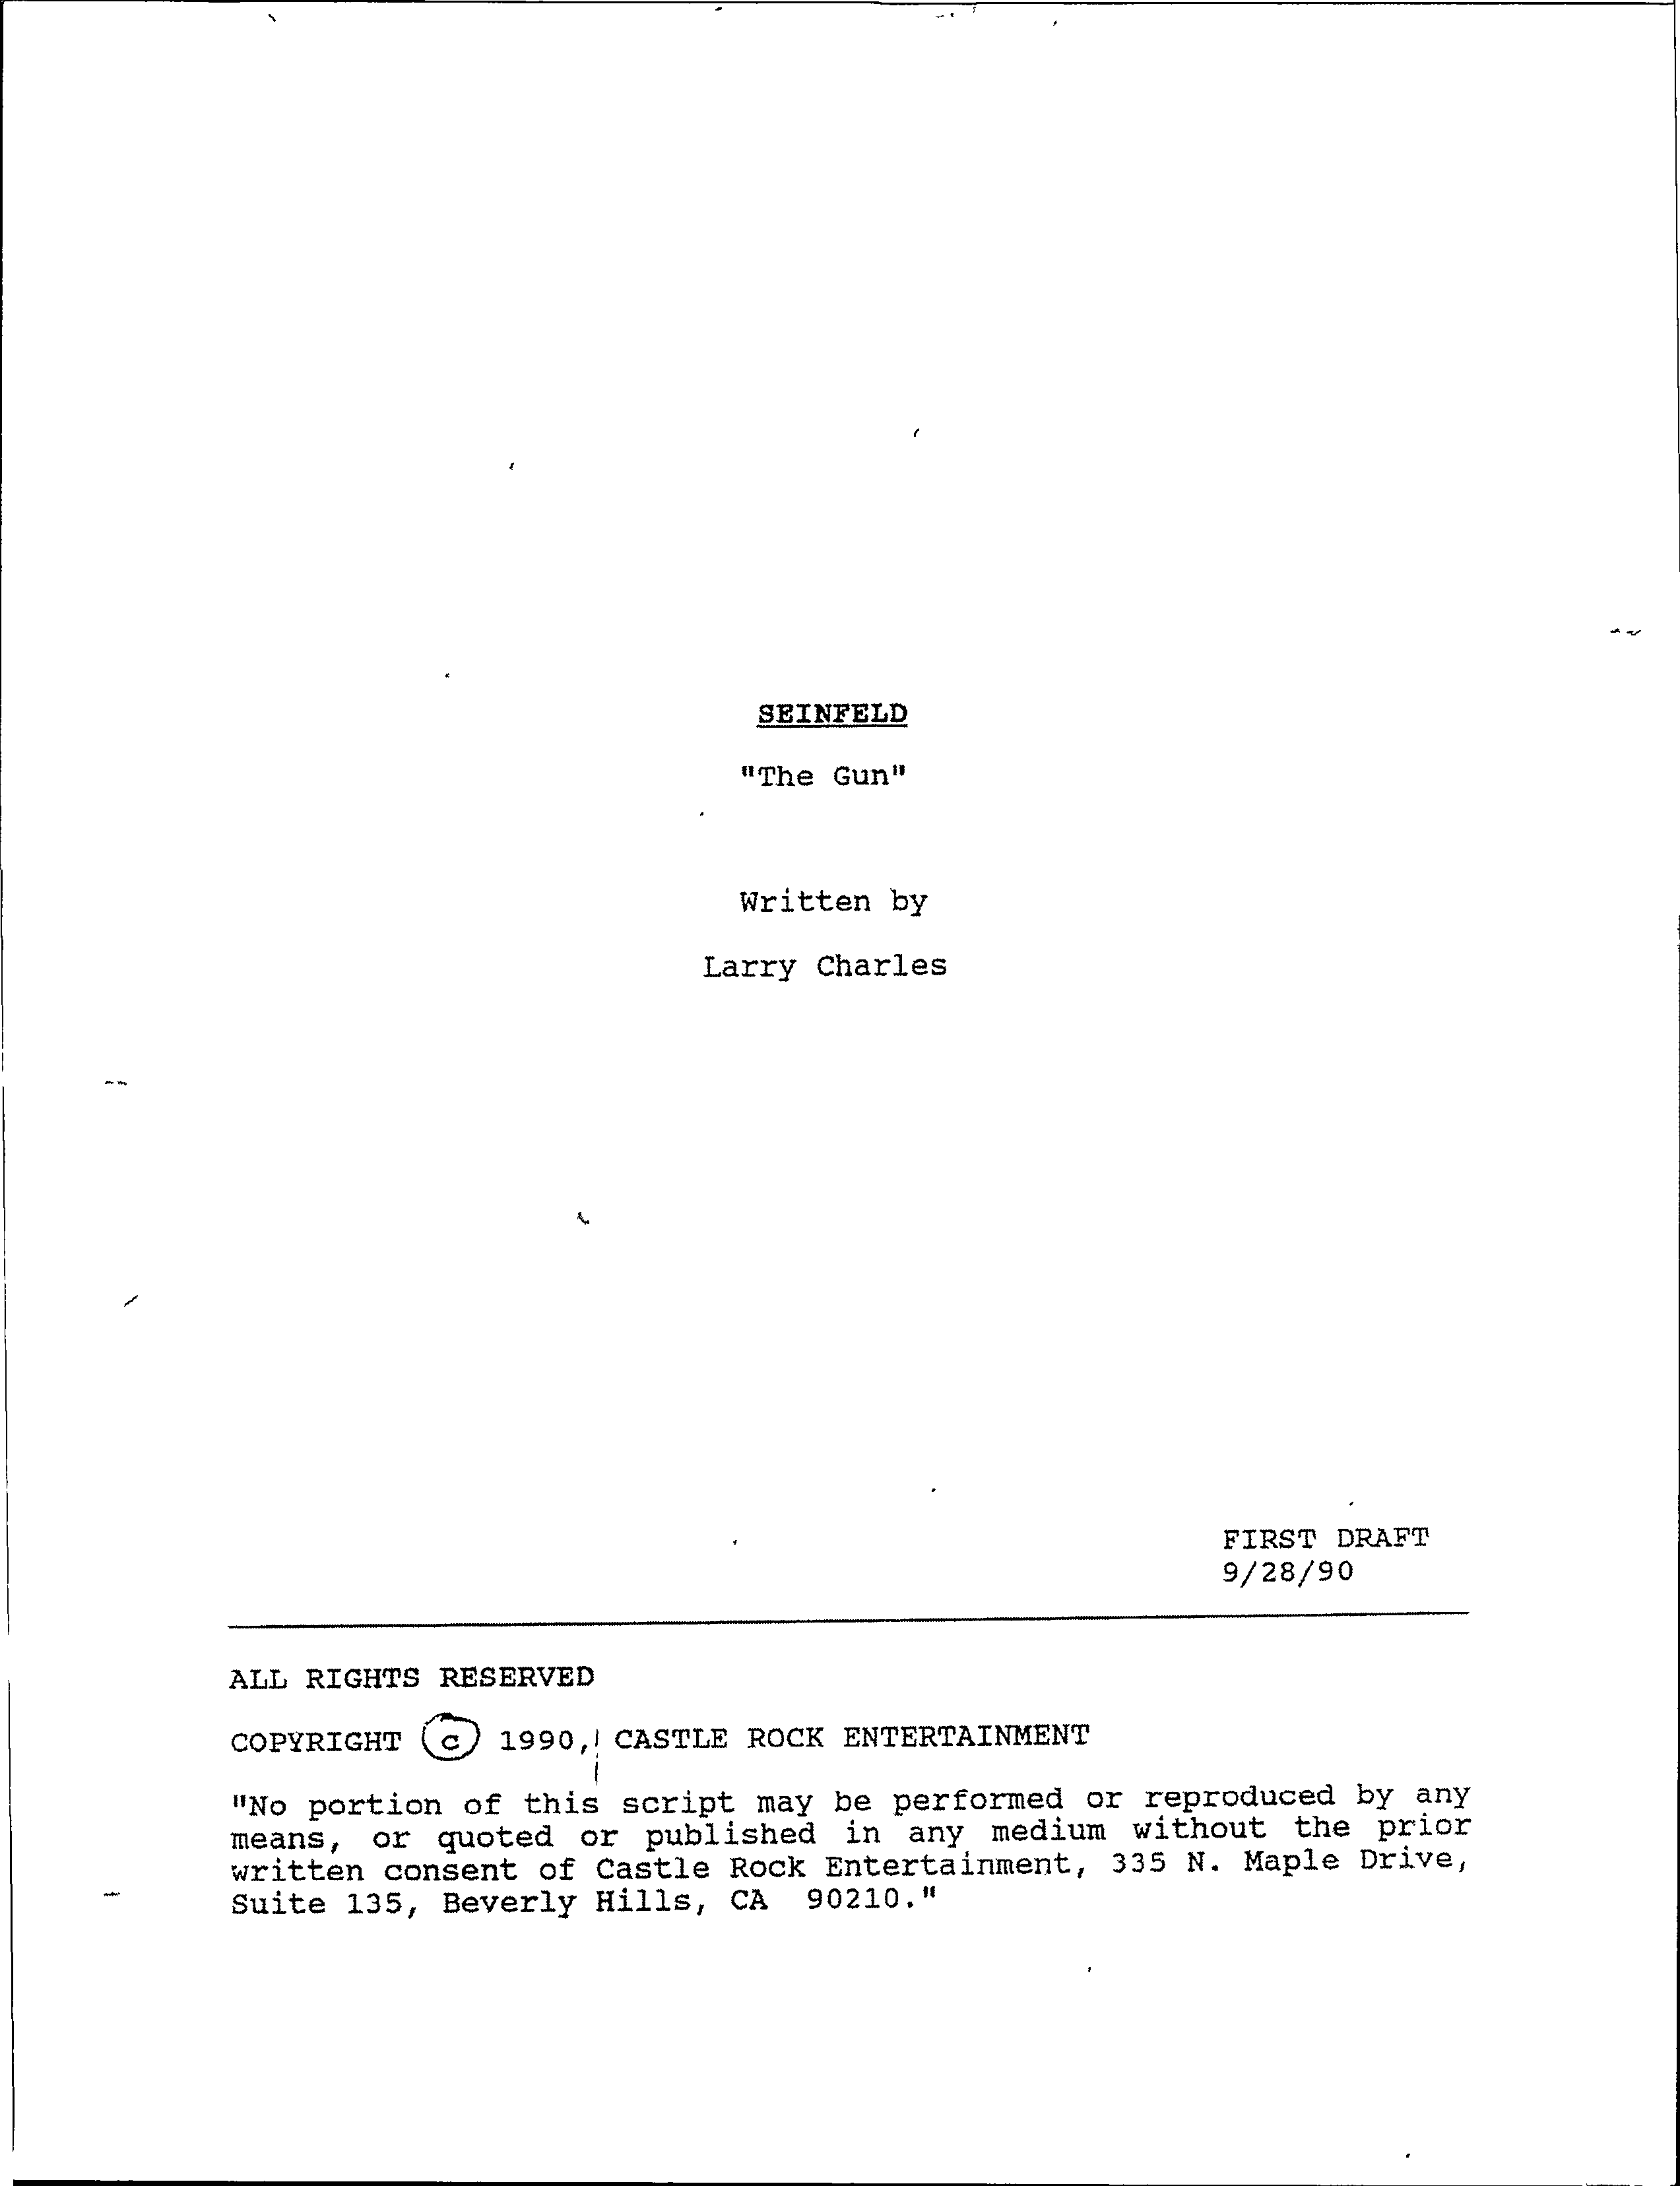 Seinfeld "The Bet/Gun" (Script) - Seinfeld "The Bet" (lost production material of cancelled episode of NBC sitcom; 1990s)